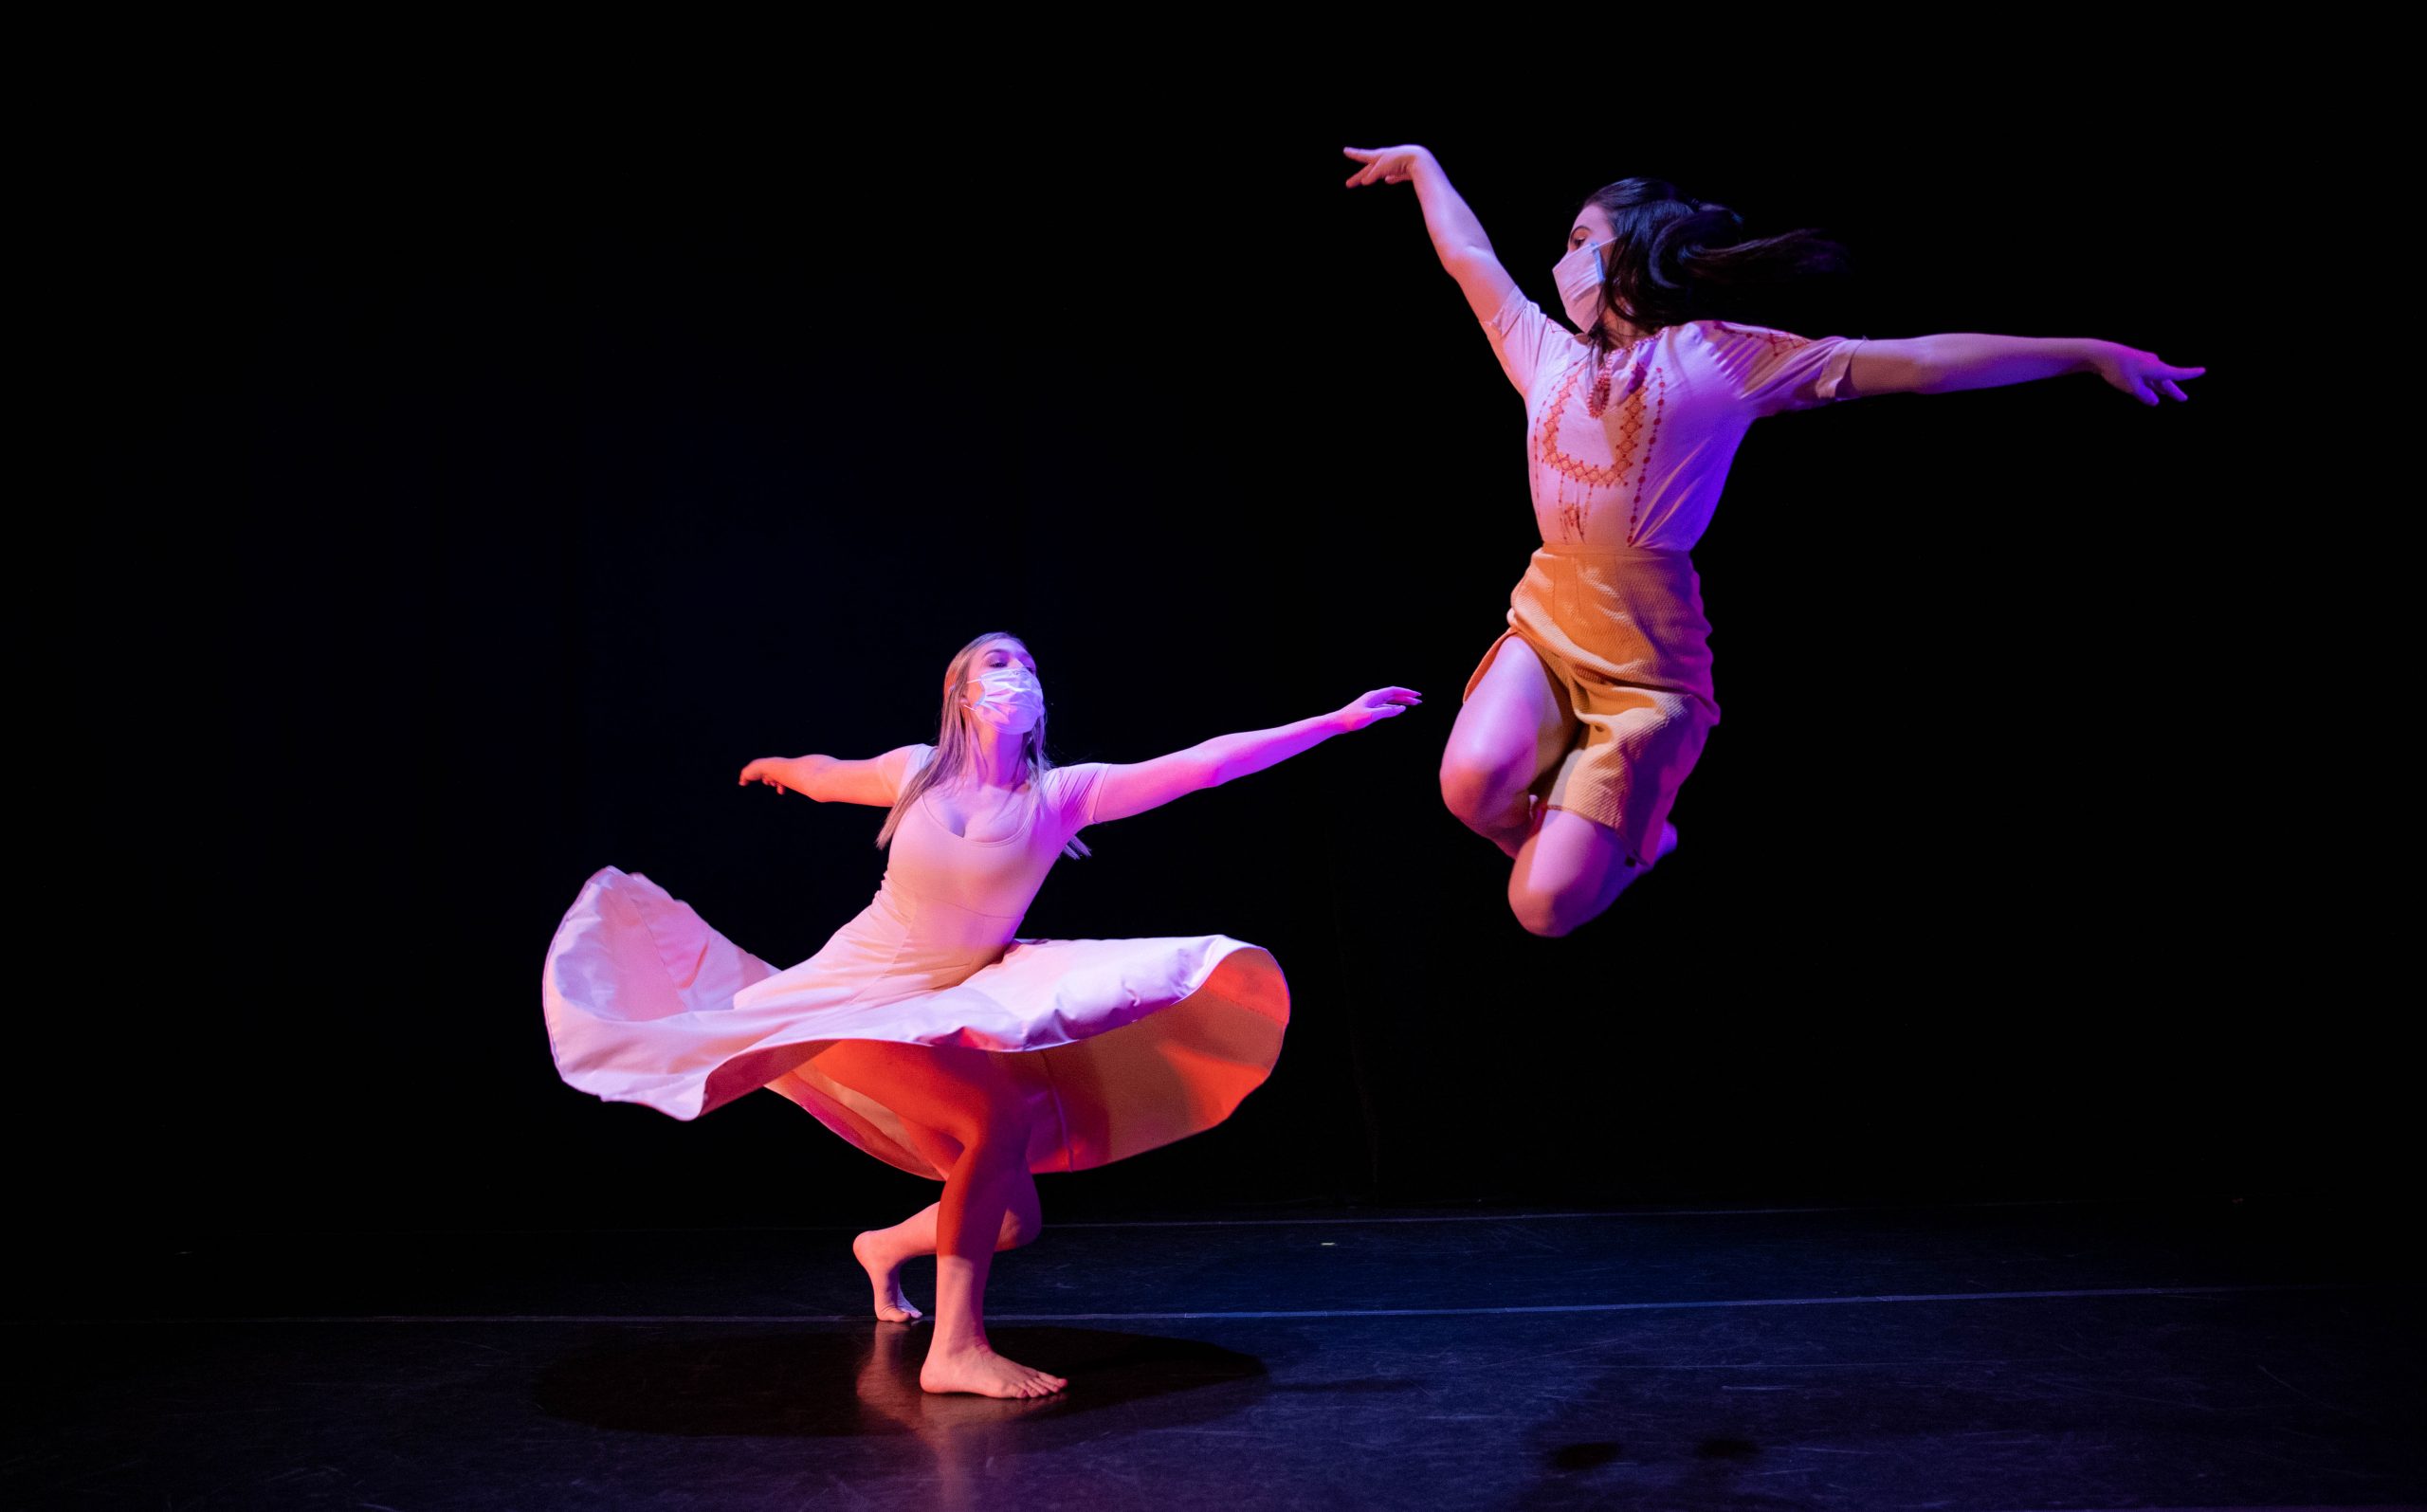 black background, two people dancing, one is leaping in the air, one is twirling, her skirt is flowing